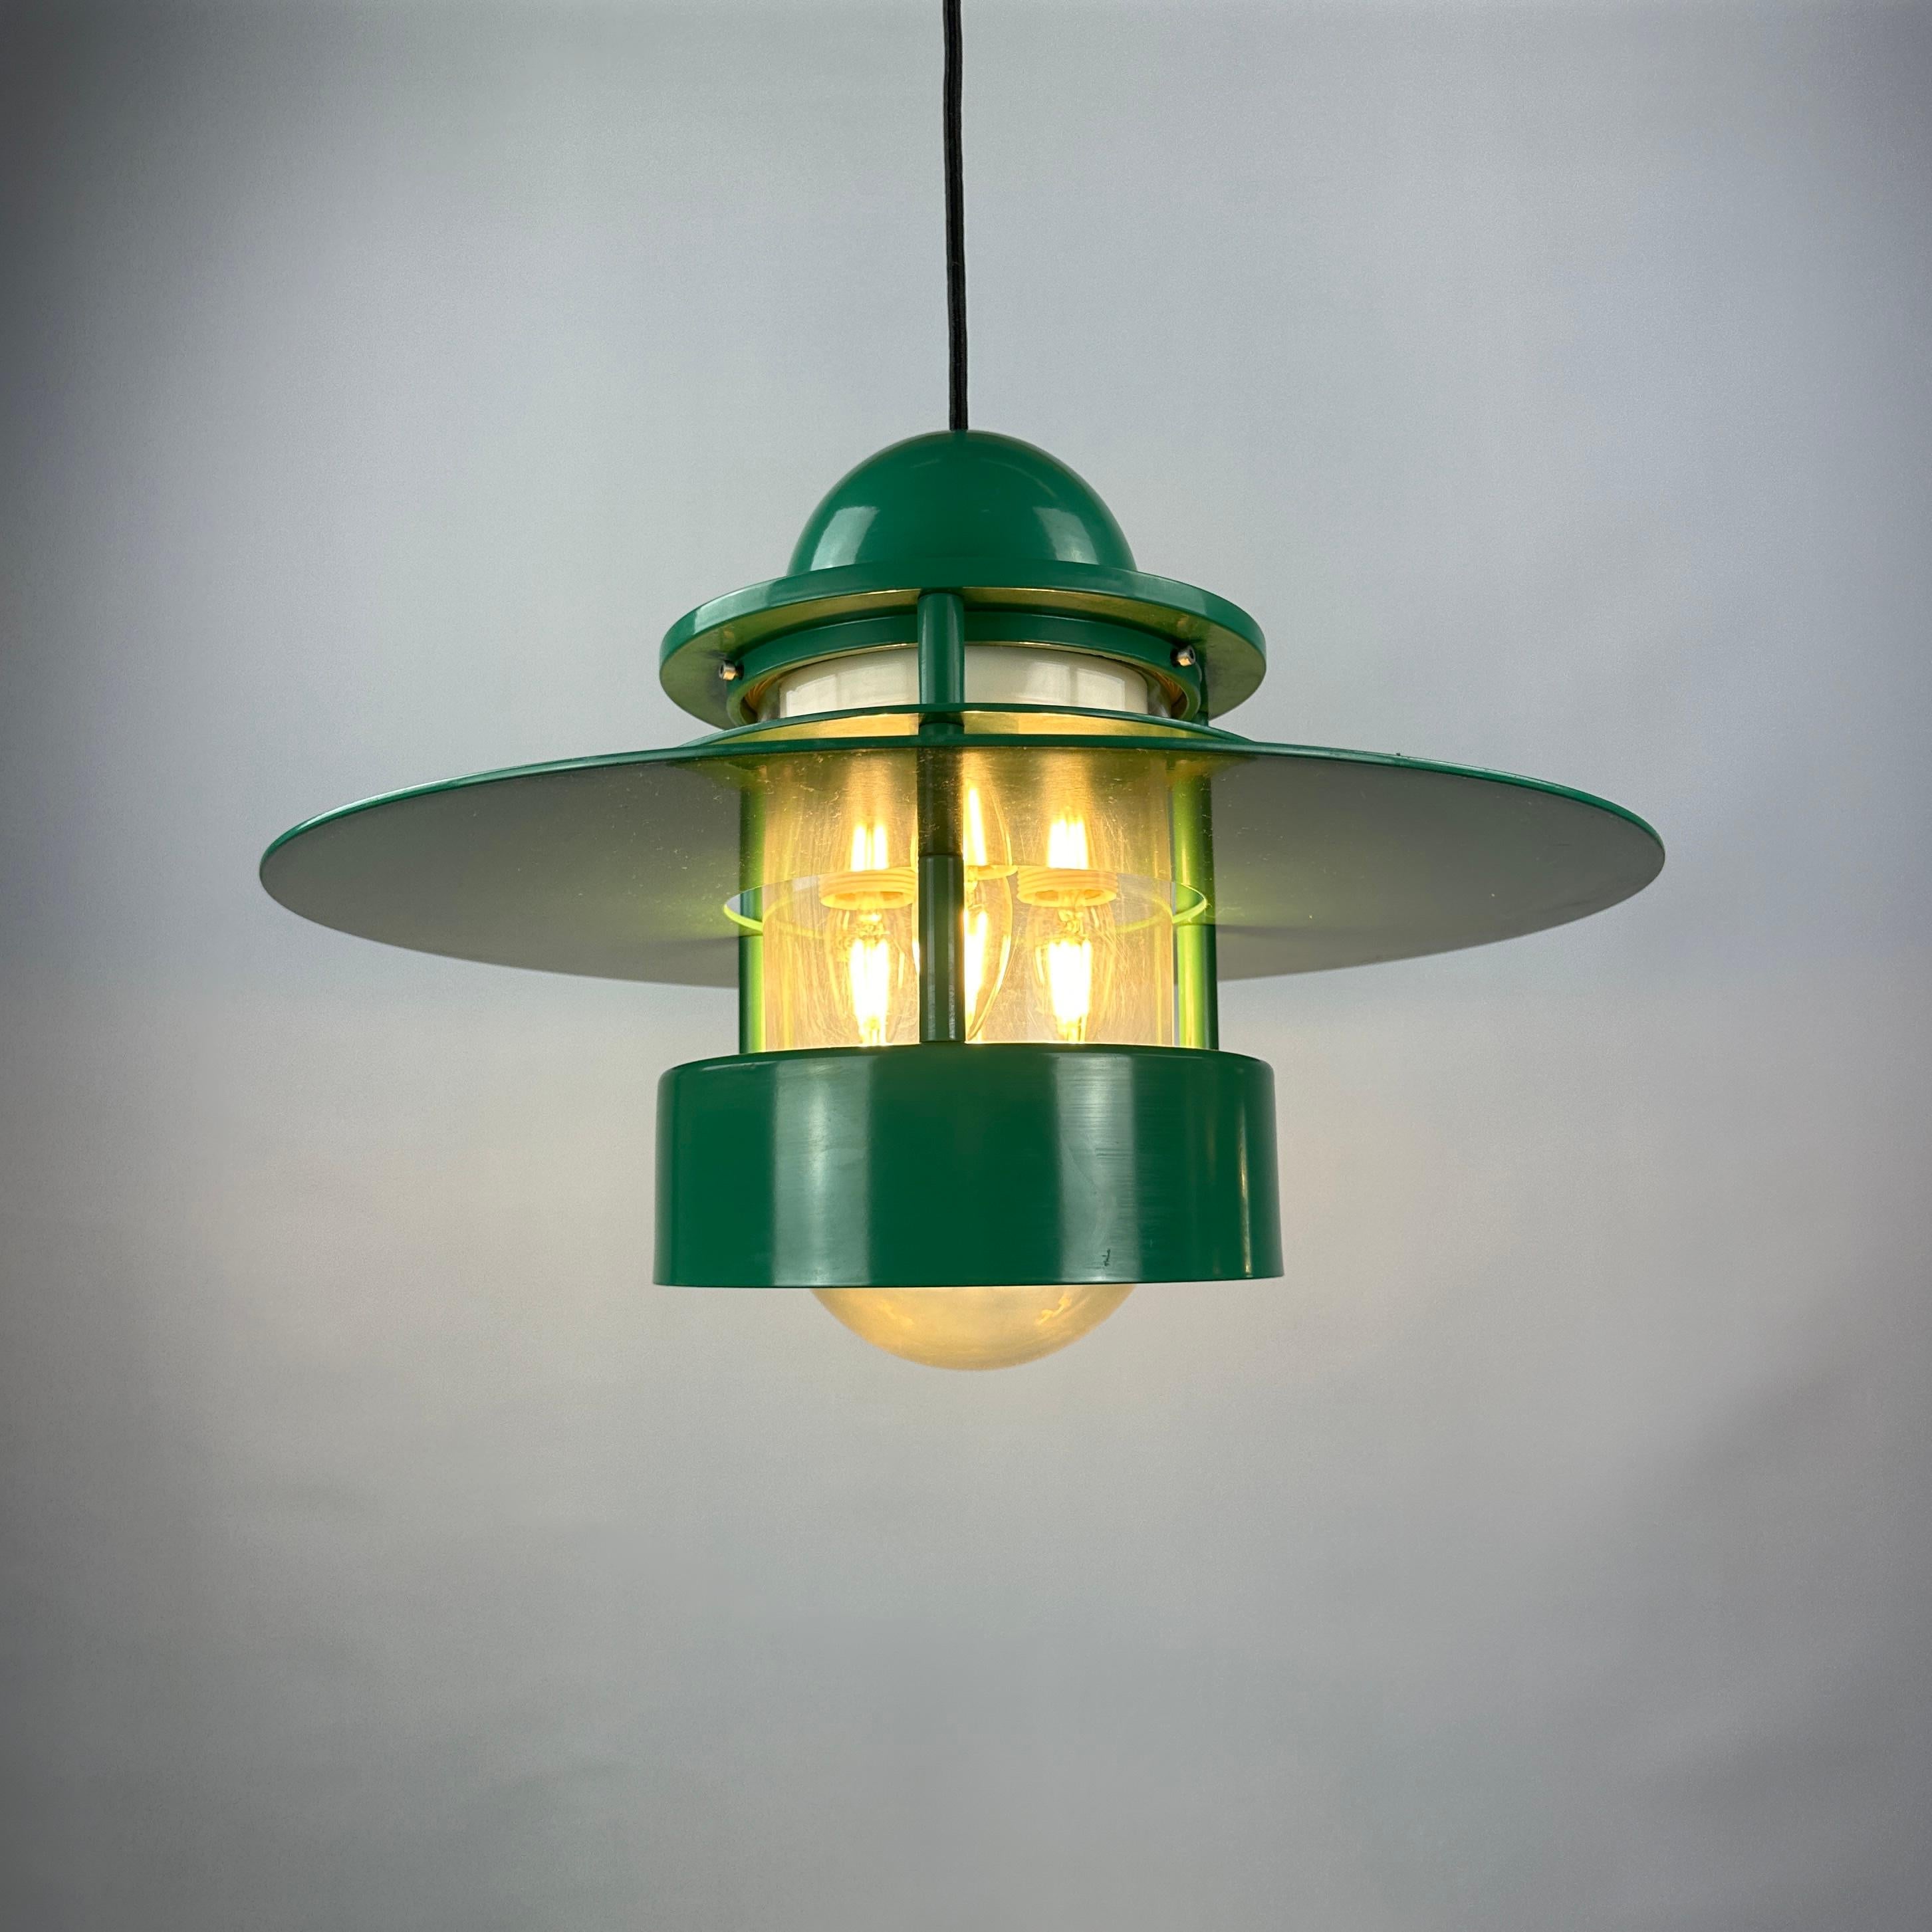 These cool large UFO shaped pendant lamp is designed by Jens Møller Jensen for Louis Poulsen in 1963. This model is called Orbiter and is the largest model of this serie. This round lampshade is made of green enamelled metal and has a clear plastic